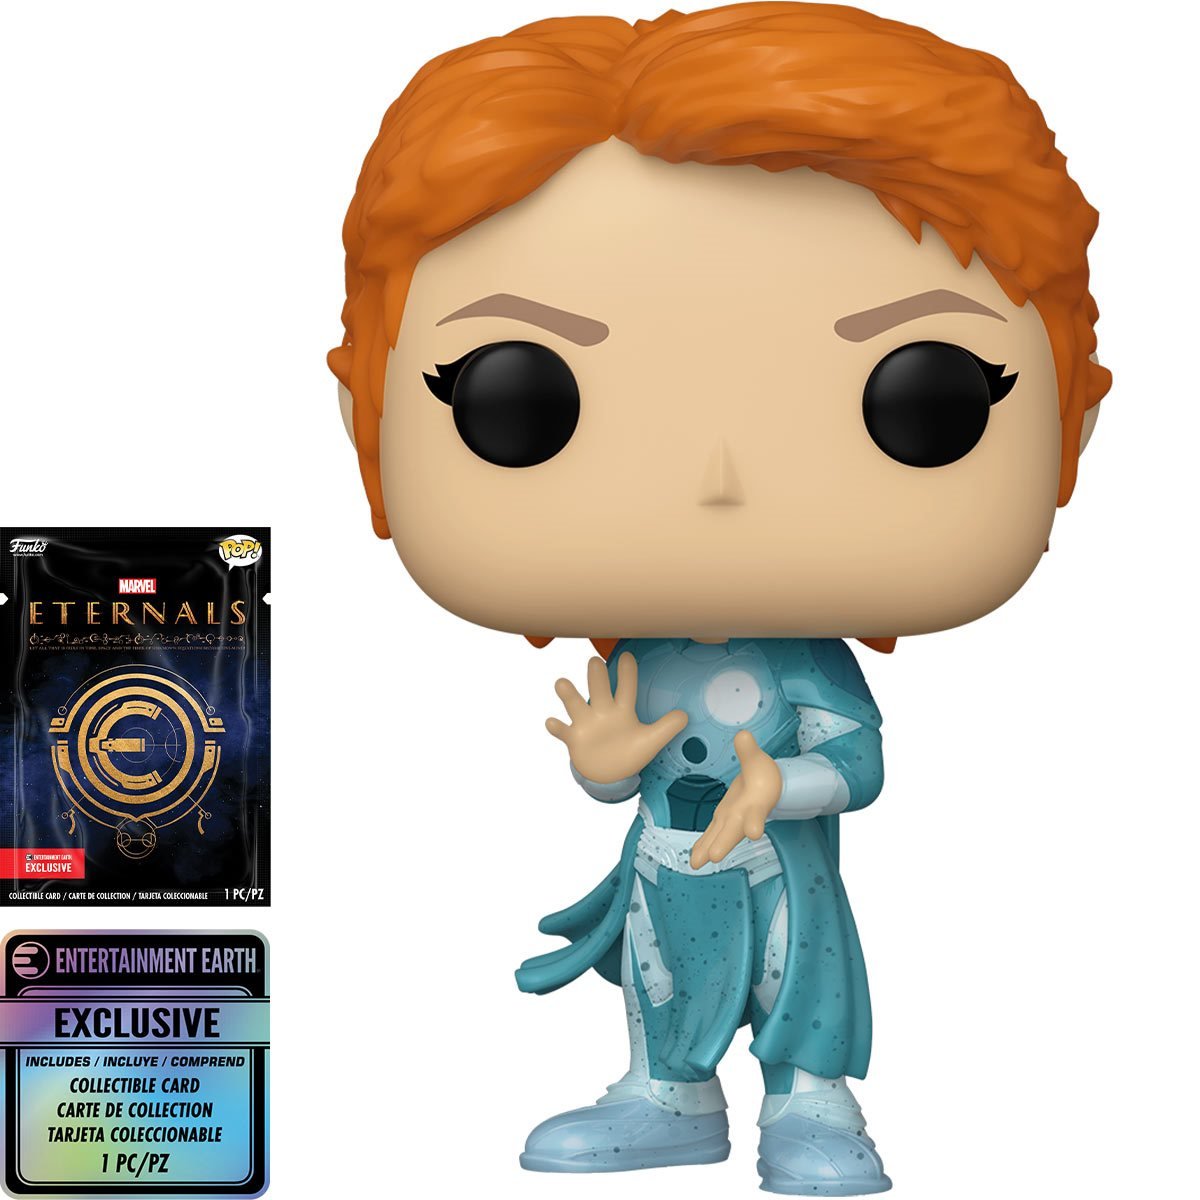 Funko Pop! Eternals: Sprite with Collectible Card - Entertainment Earth Exclusive